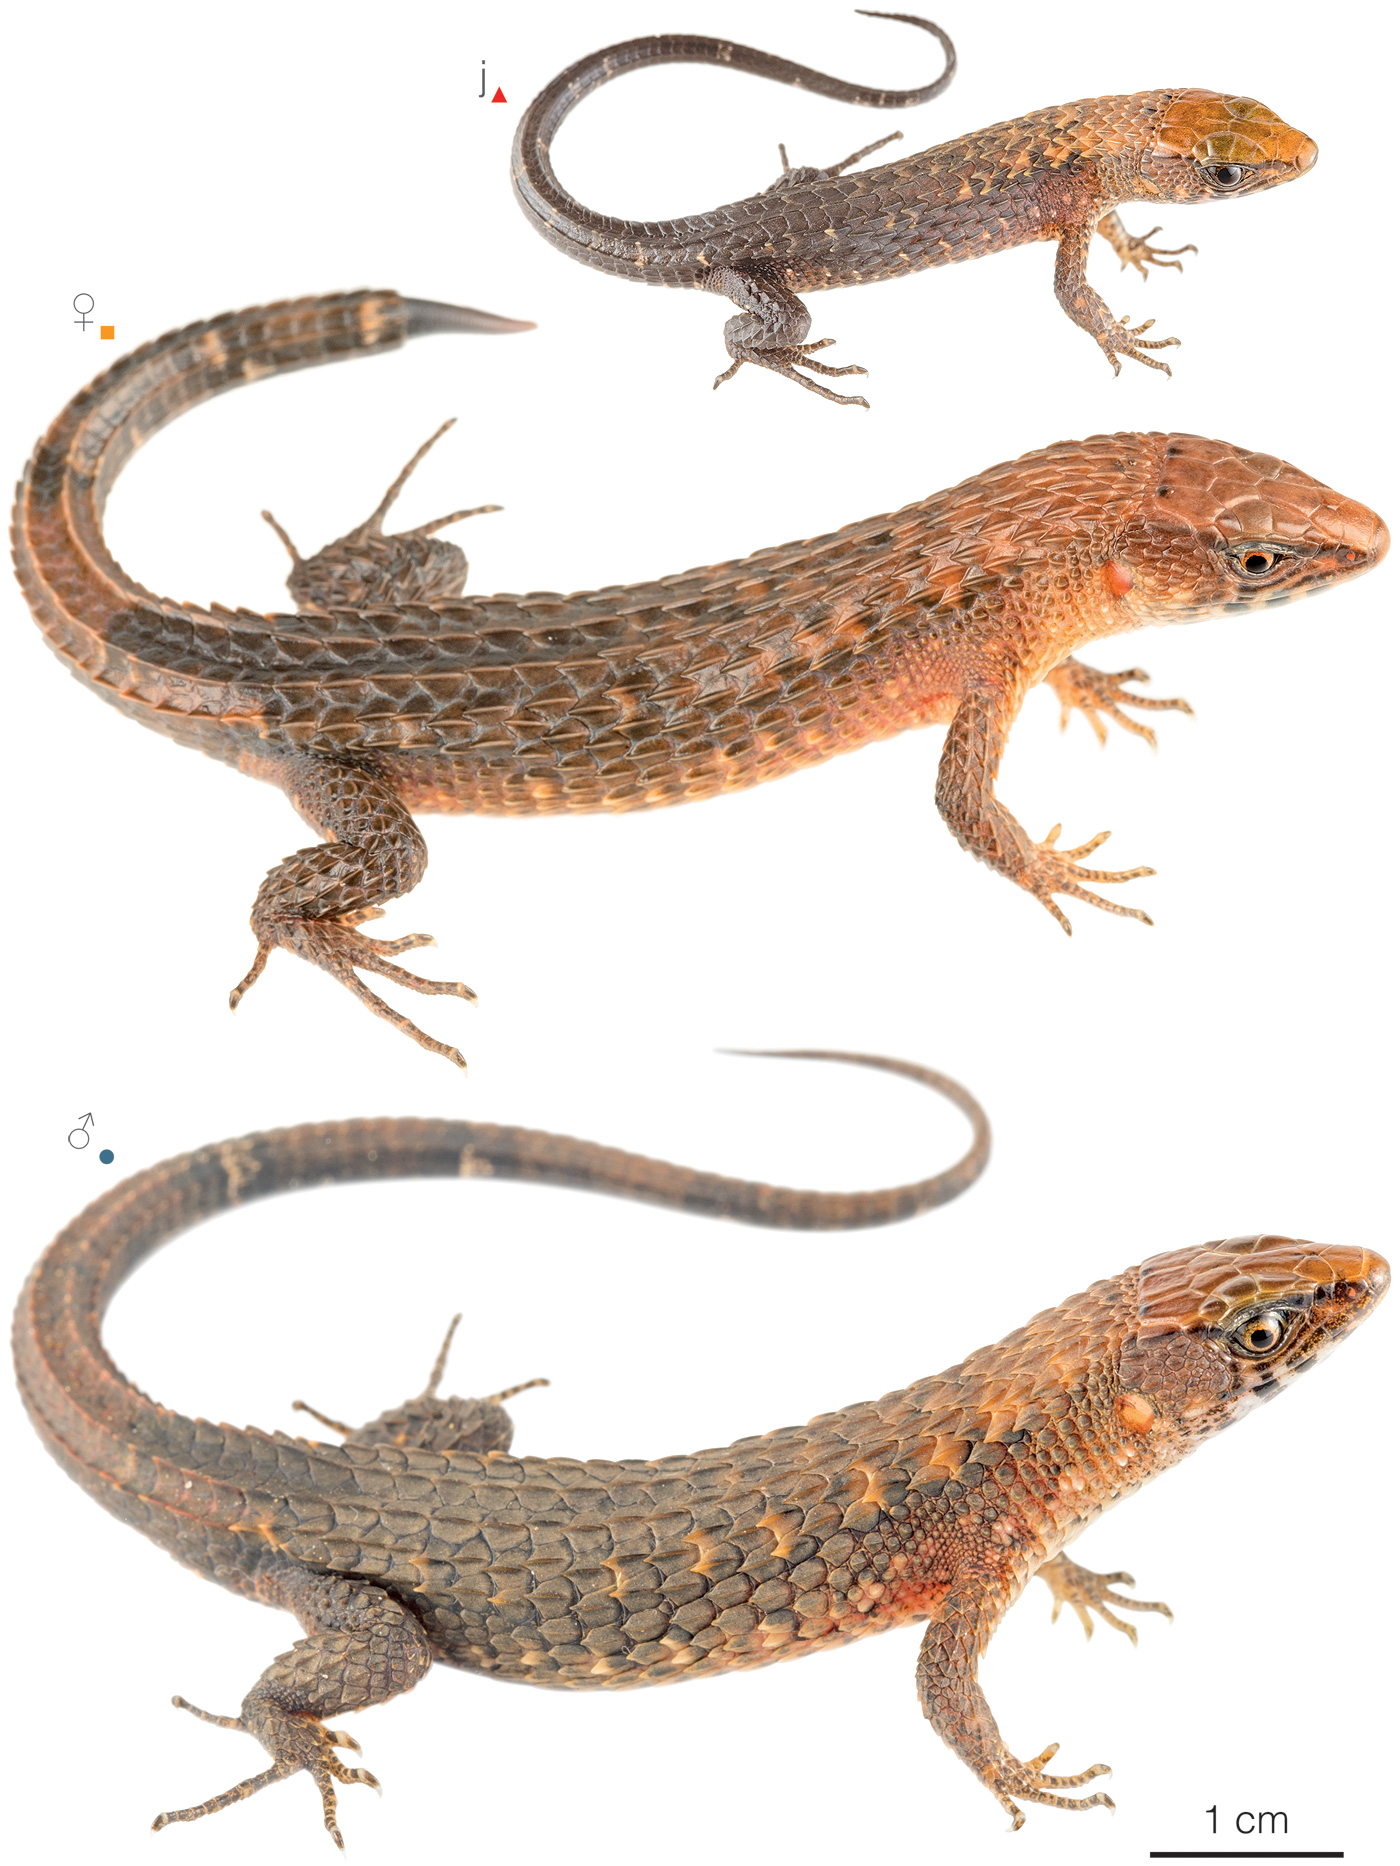 Figure showing variation among individuals of Alopoglossus copii